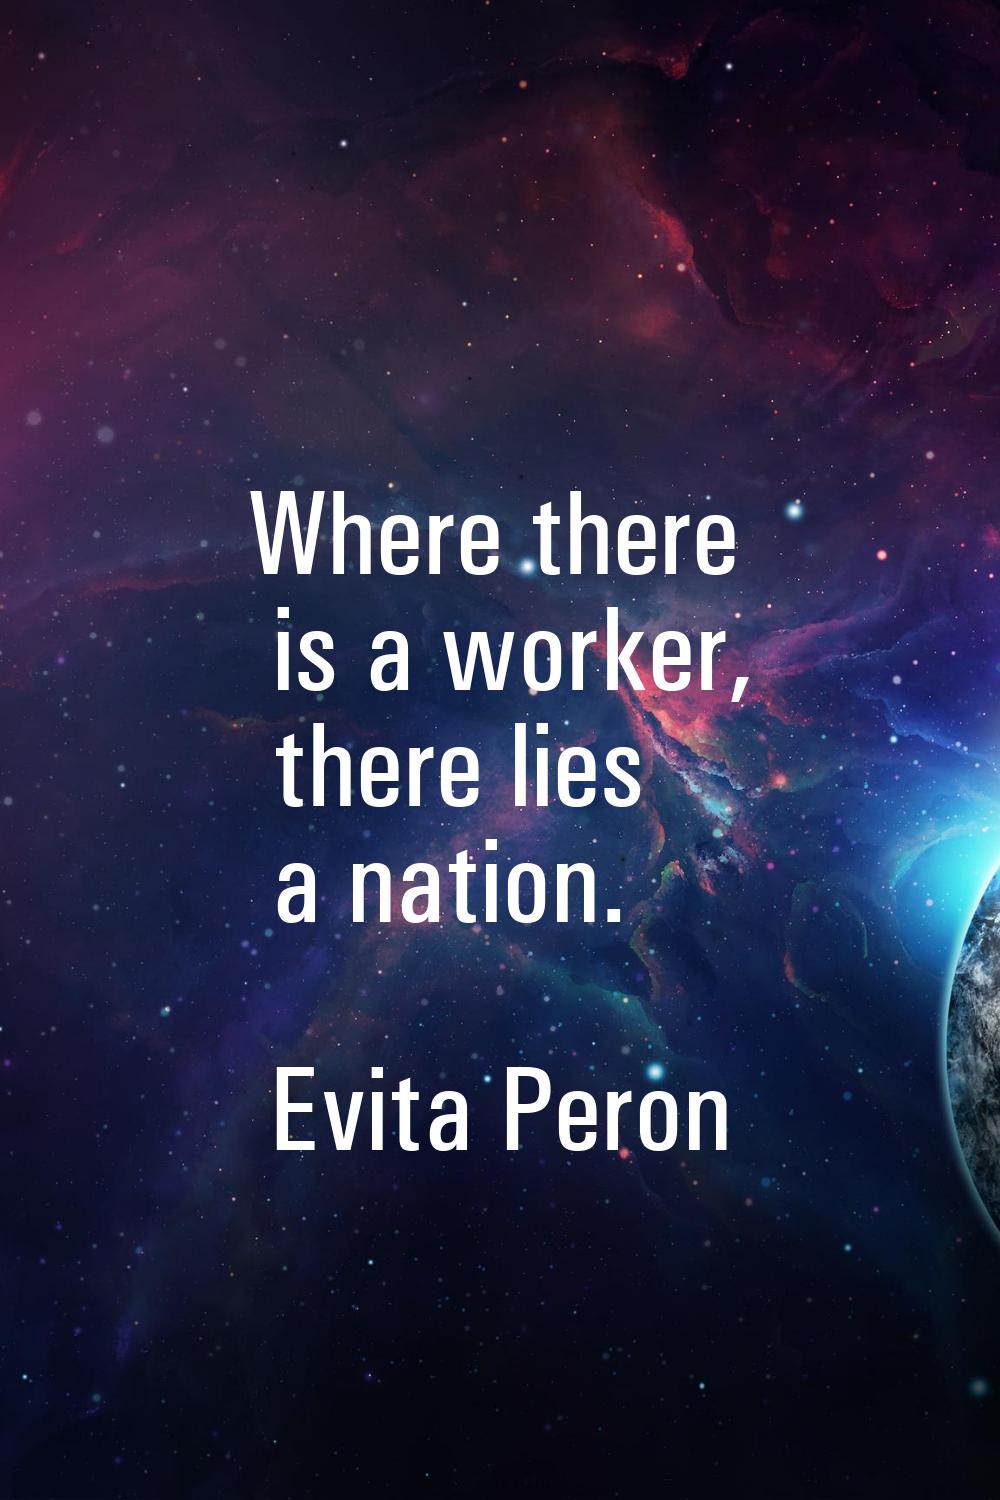 Where there is a worker, there lies a nation.